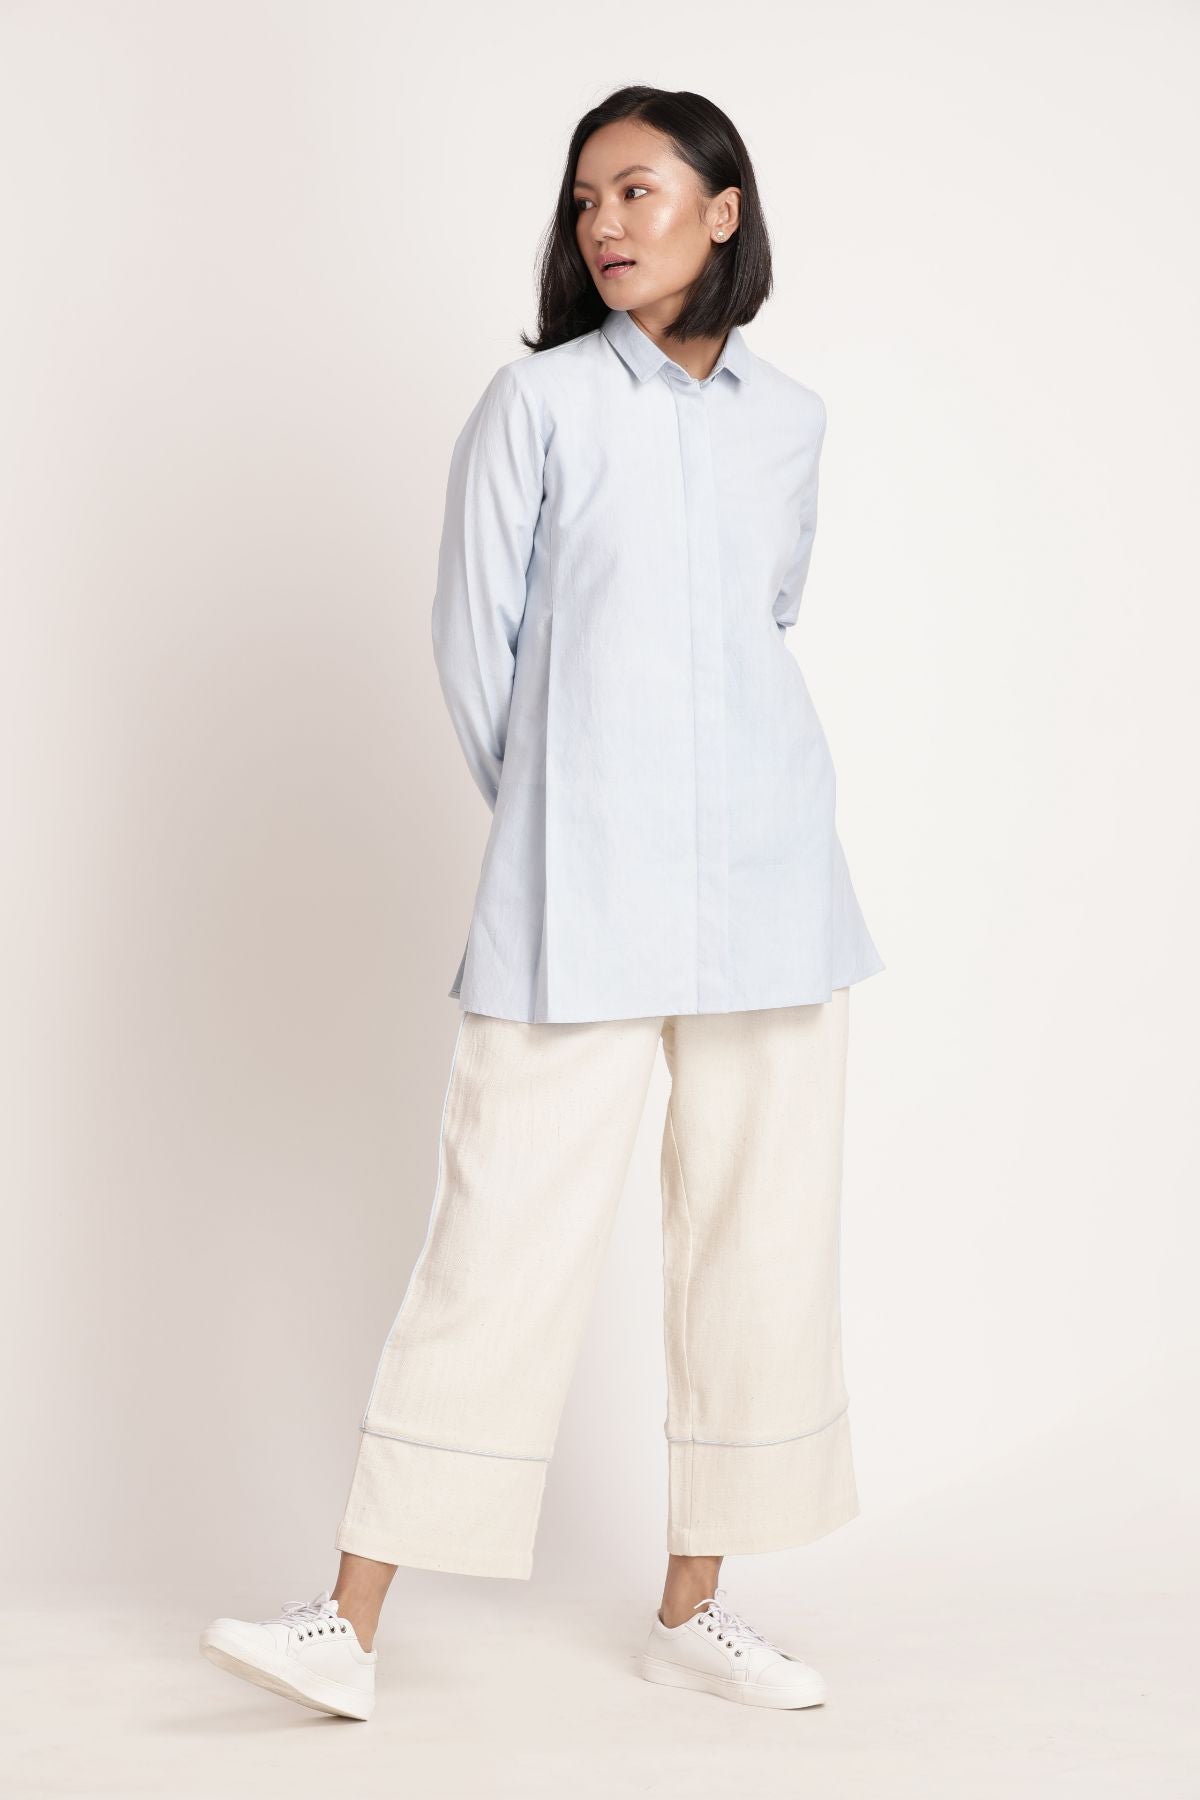 Blue Sora Beju Set at Kamakhyaa by Itya. This item is Blue, Co-ord Sets, Hand Spun Cotton, Handwoven cotton, Natural, Off-white, Office, Office Wear, Office Wear Co-ords, Pastel Perfect, Pastel Perfect by Itya, Plant Dye, Relaxed Fit, Solids, SS22, Womenswear